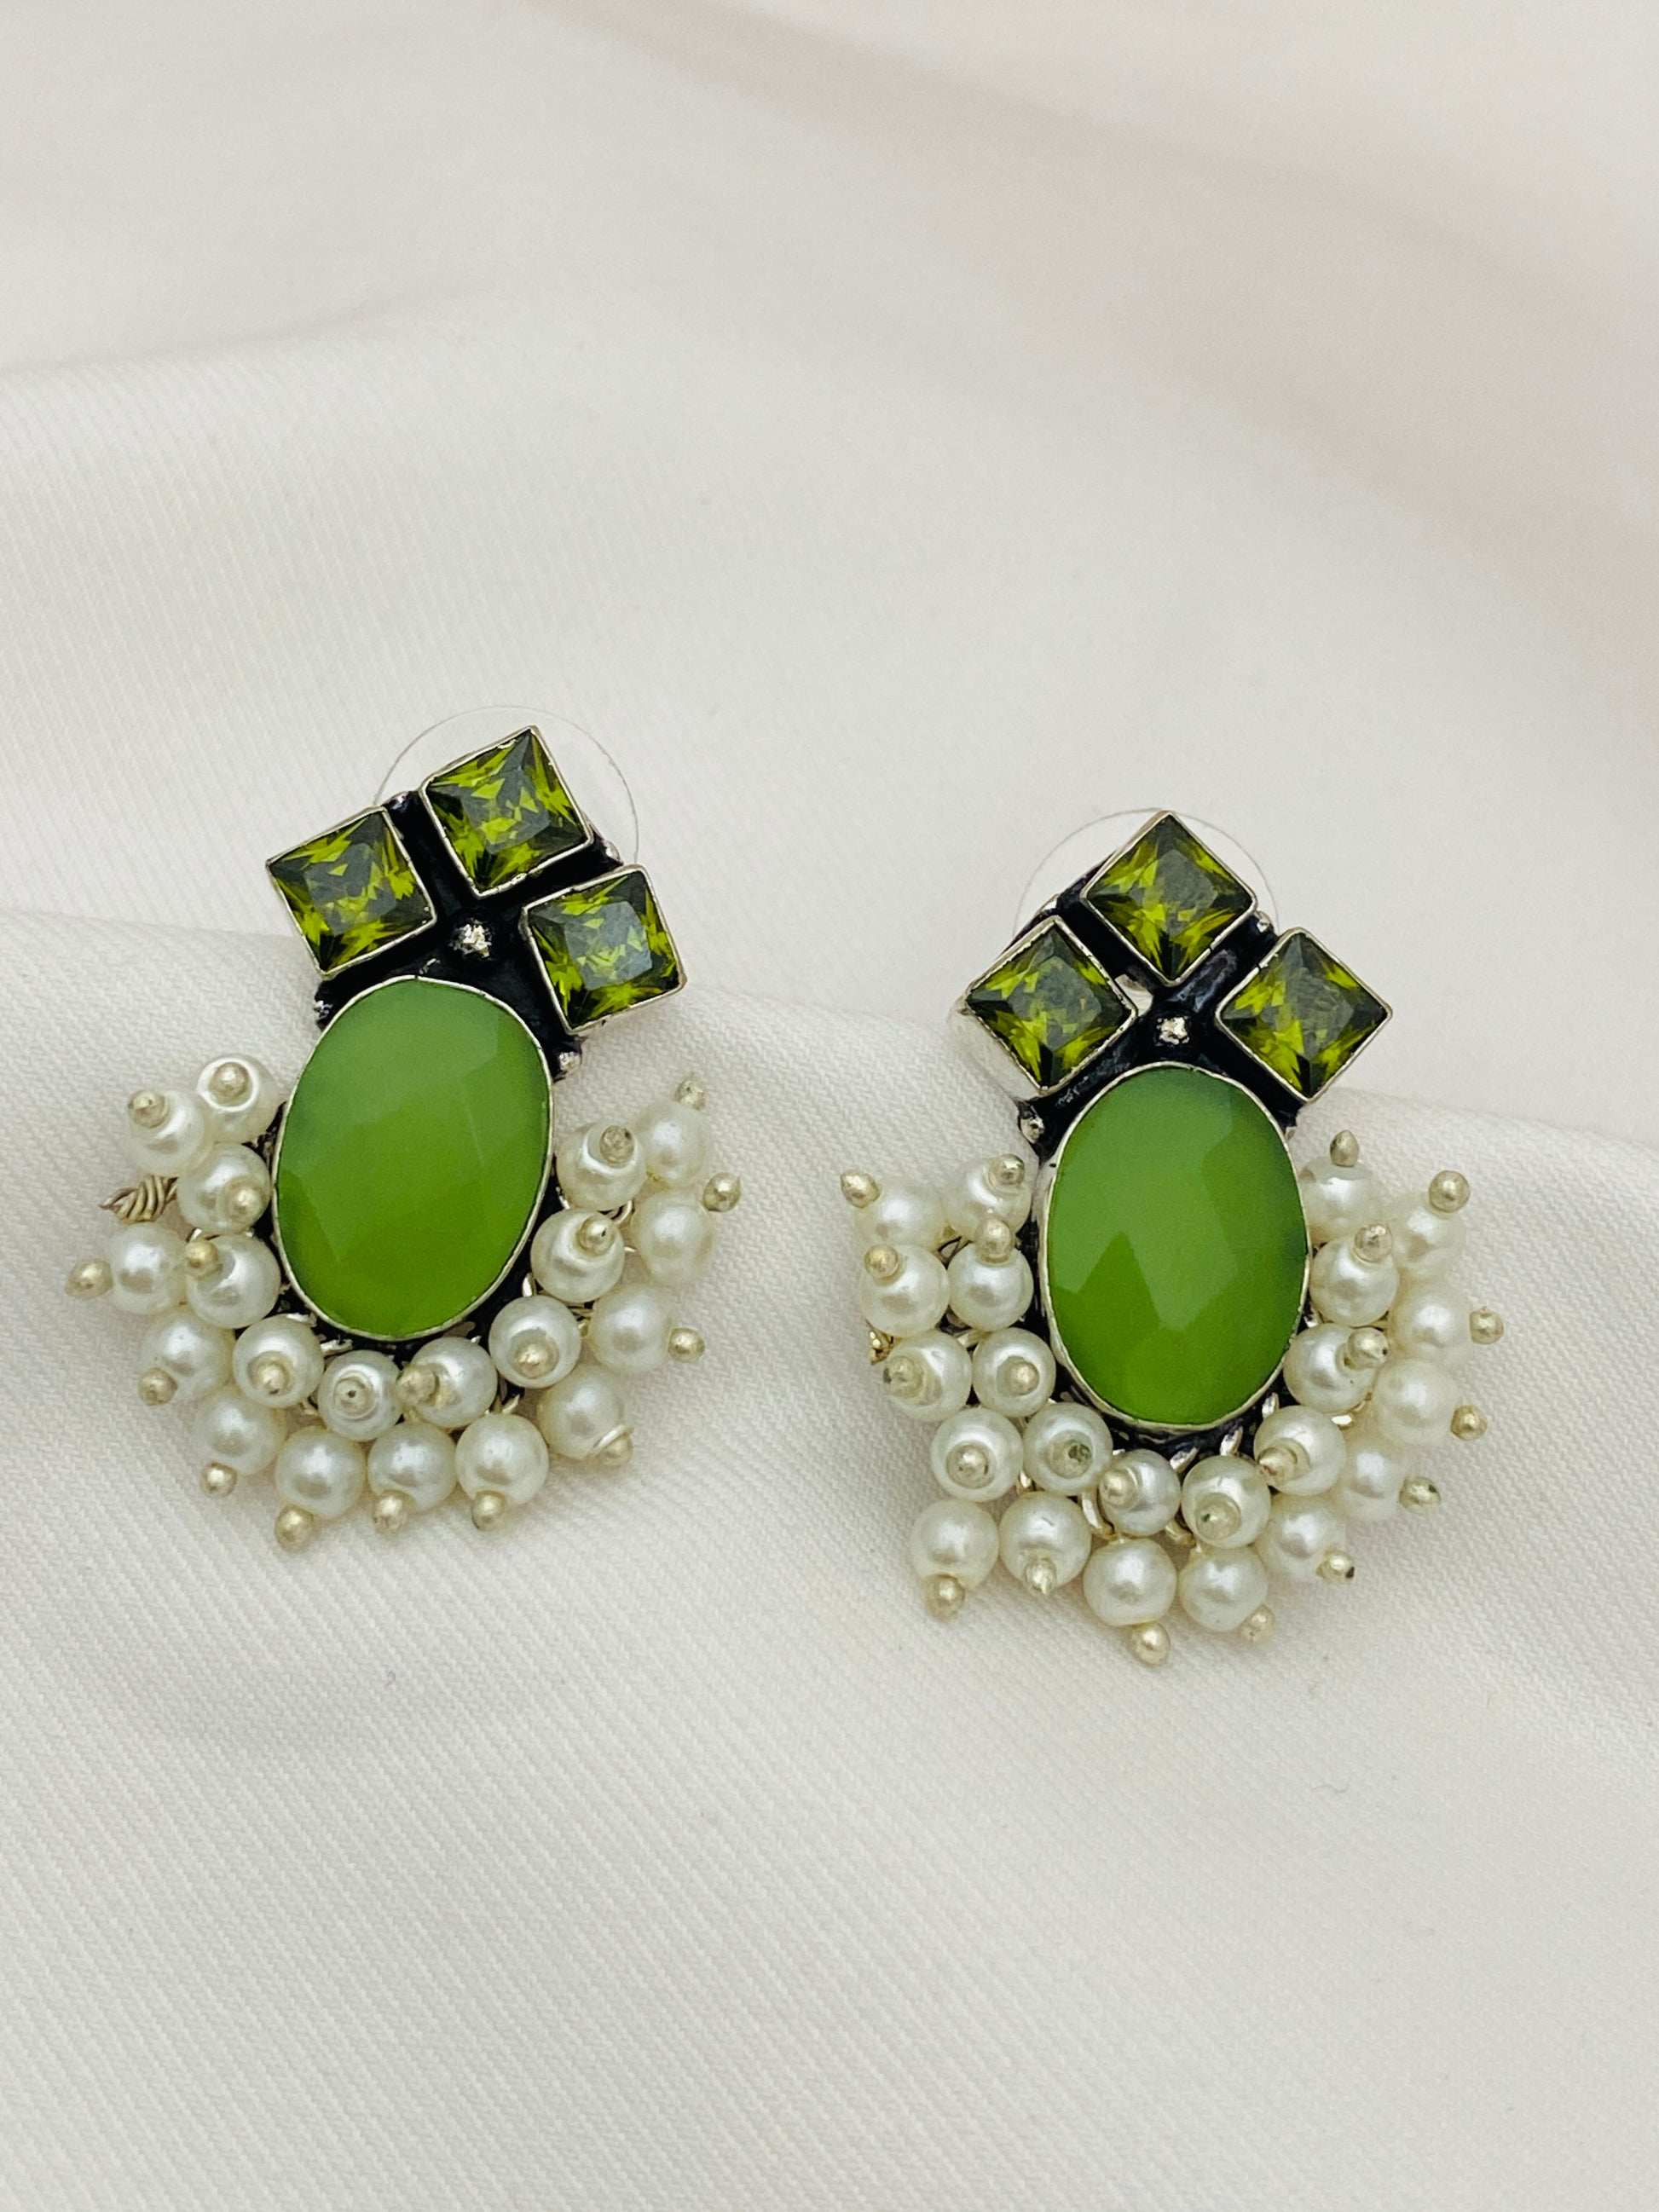 Elegant Oval Shaped Pista Green Color Silver Plated Stud Earrings With Pearl Beads